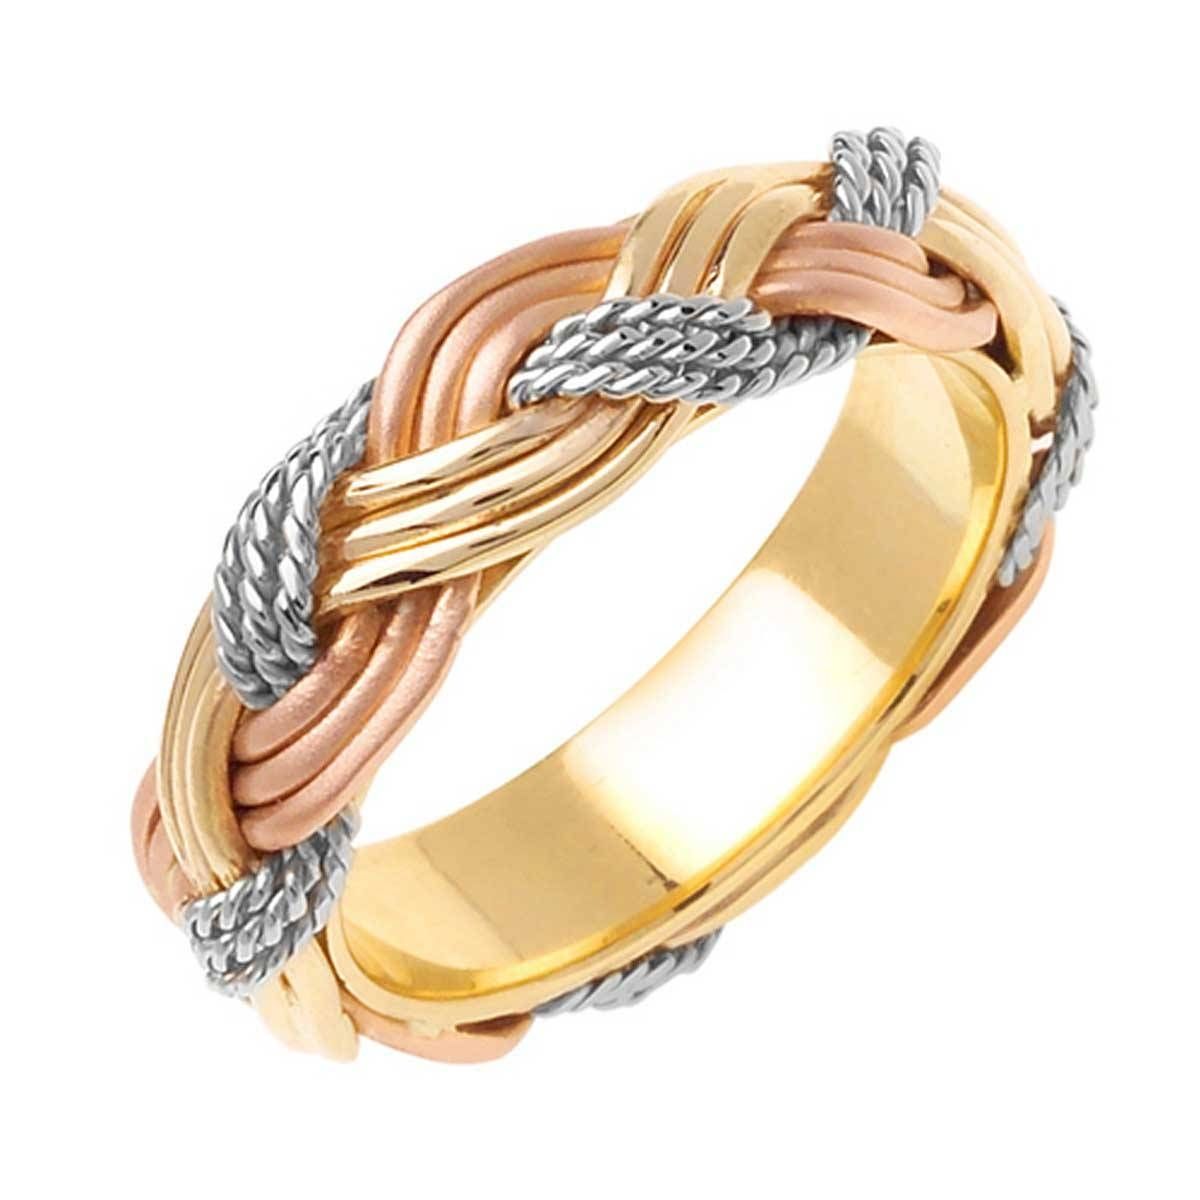 14k Tri Color Gold African Braid Band 6mm  3002747 – Shop At Regarding Three Color Braided Wedding Bands (View 3 of 15)